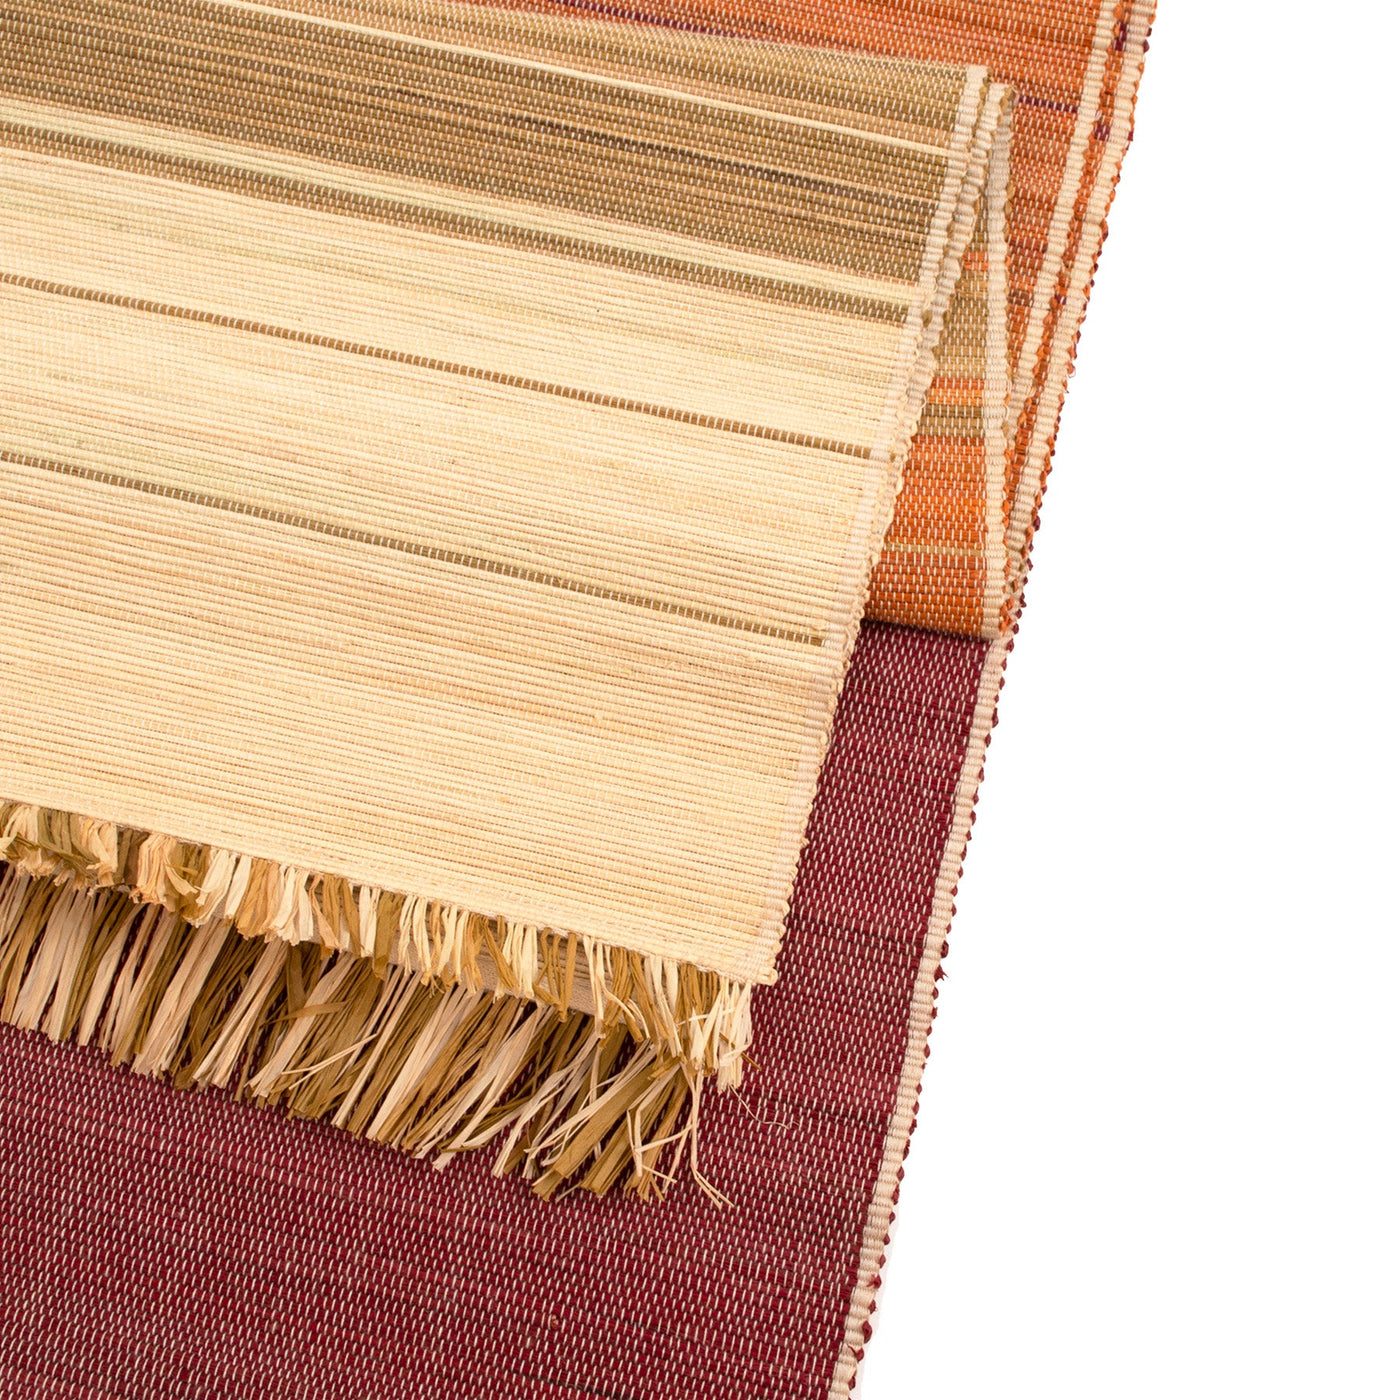 Earthen Craft Table Runner - 72" Flame Fringed